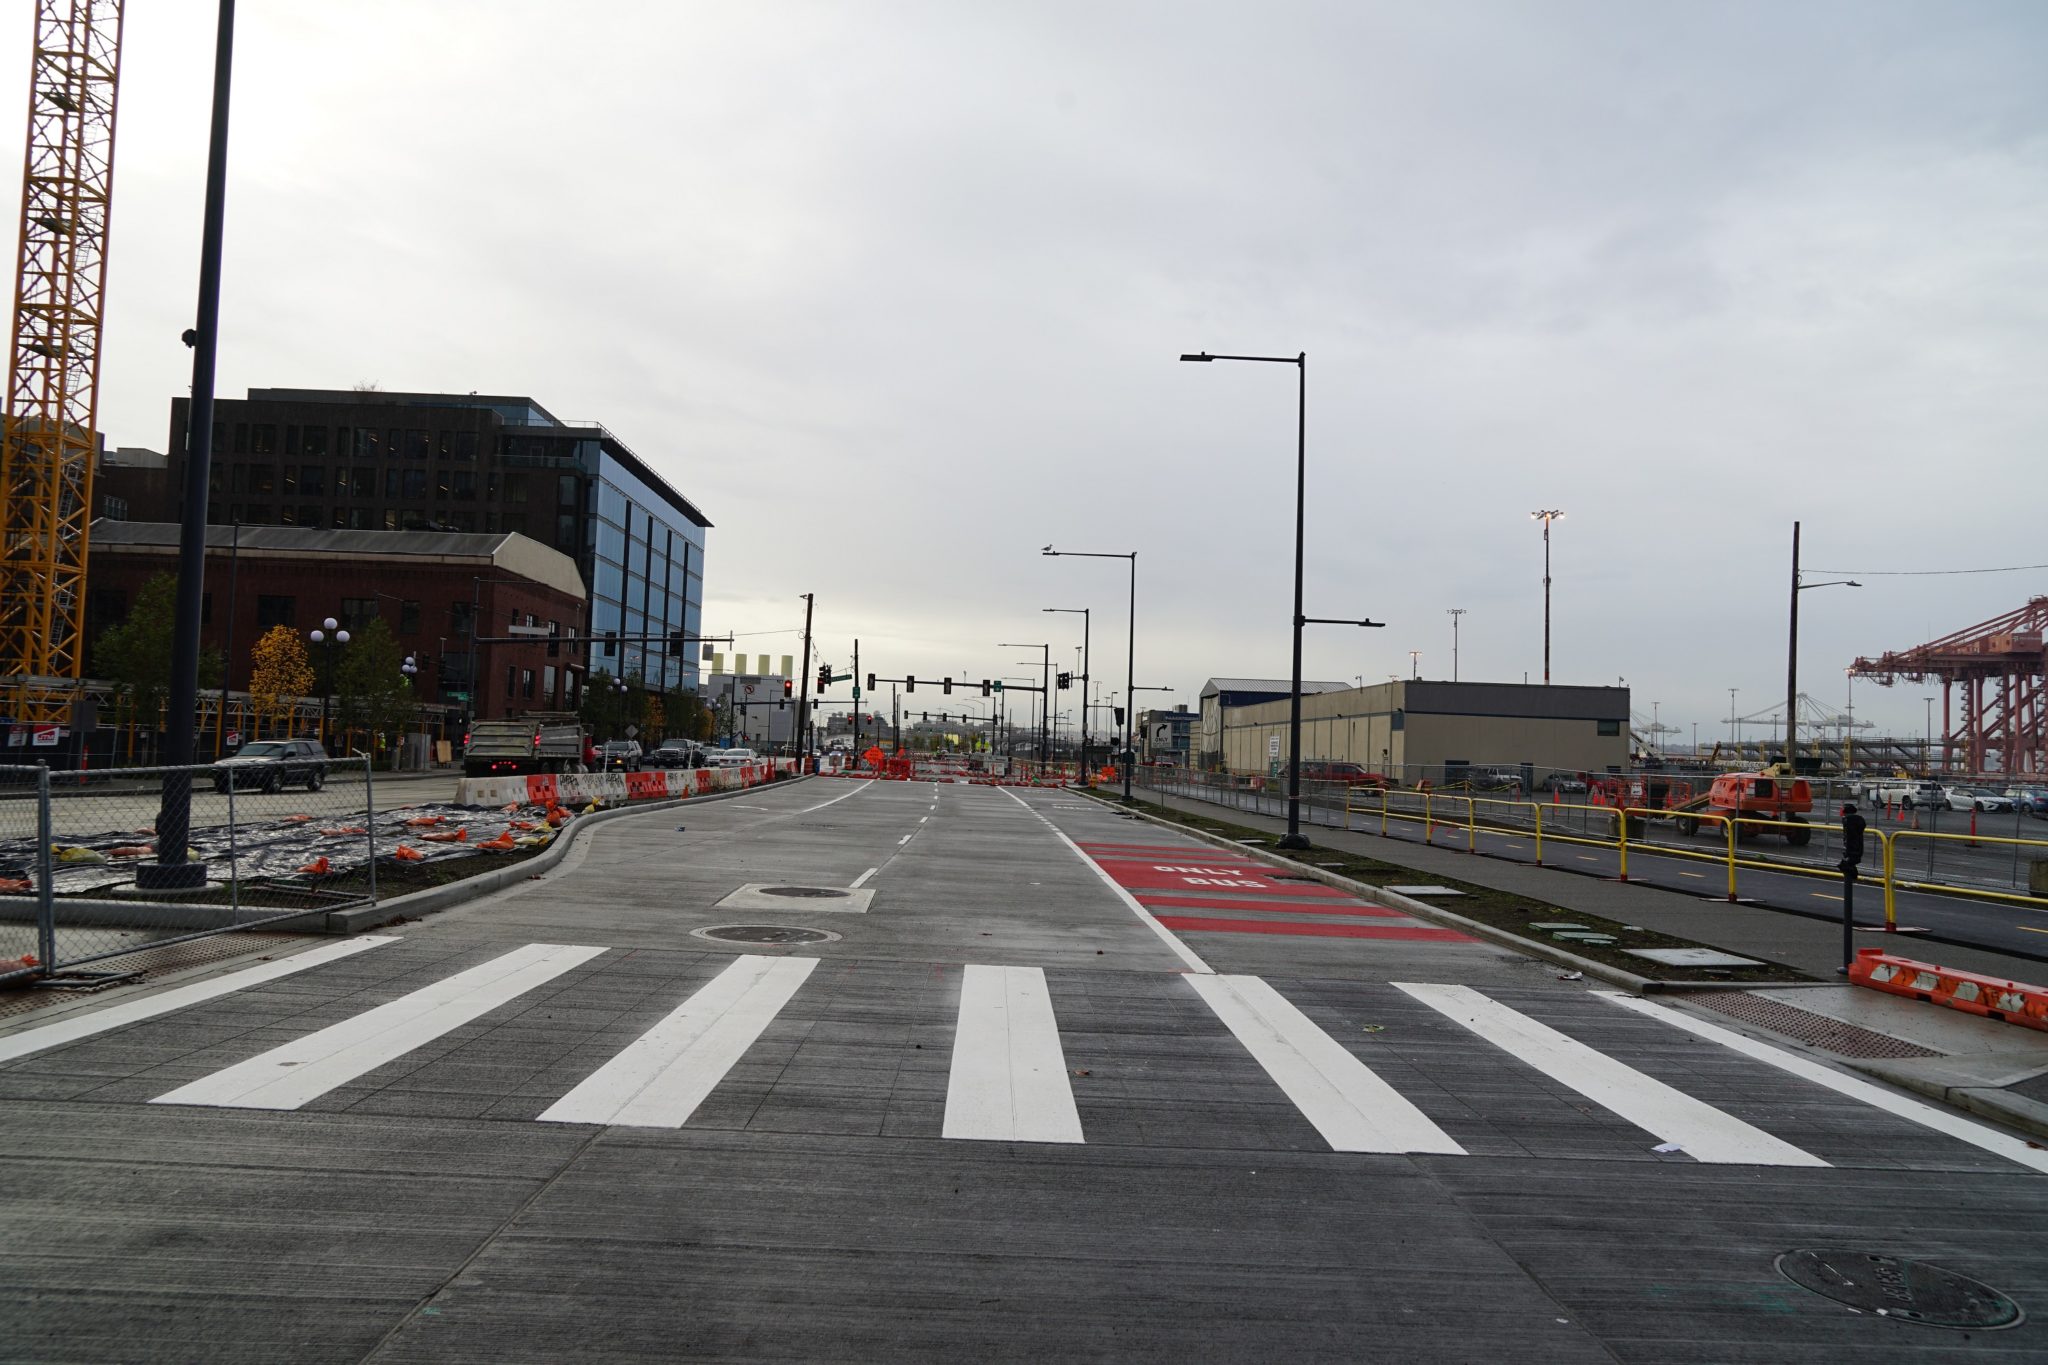 A photo of the newly paved Alaskan Way S at S Main St. The image shows the new roadway, with a marked crosswalk in the foreground. Buildings are visible in the background, along with several street lights.